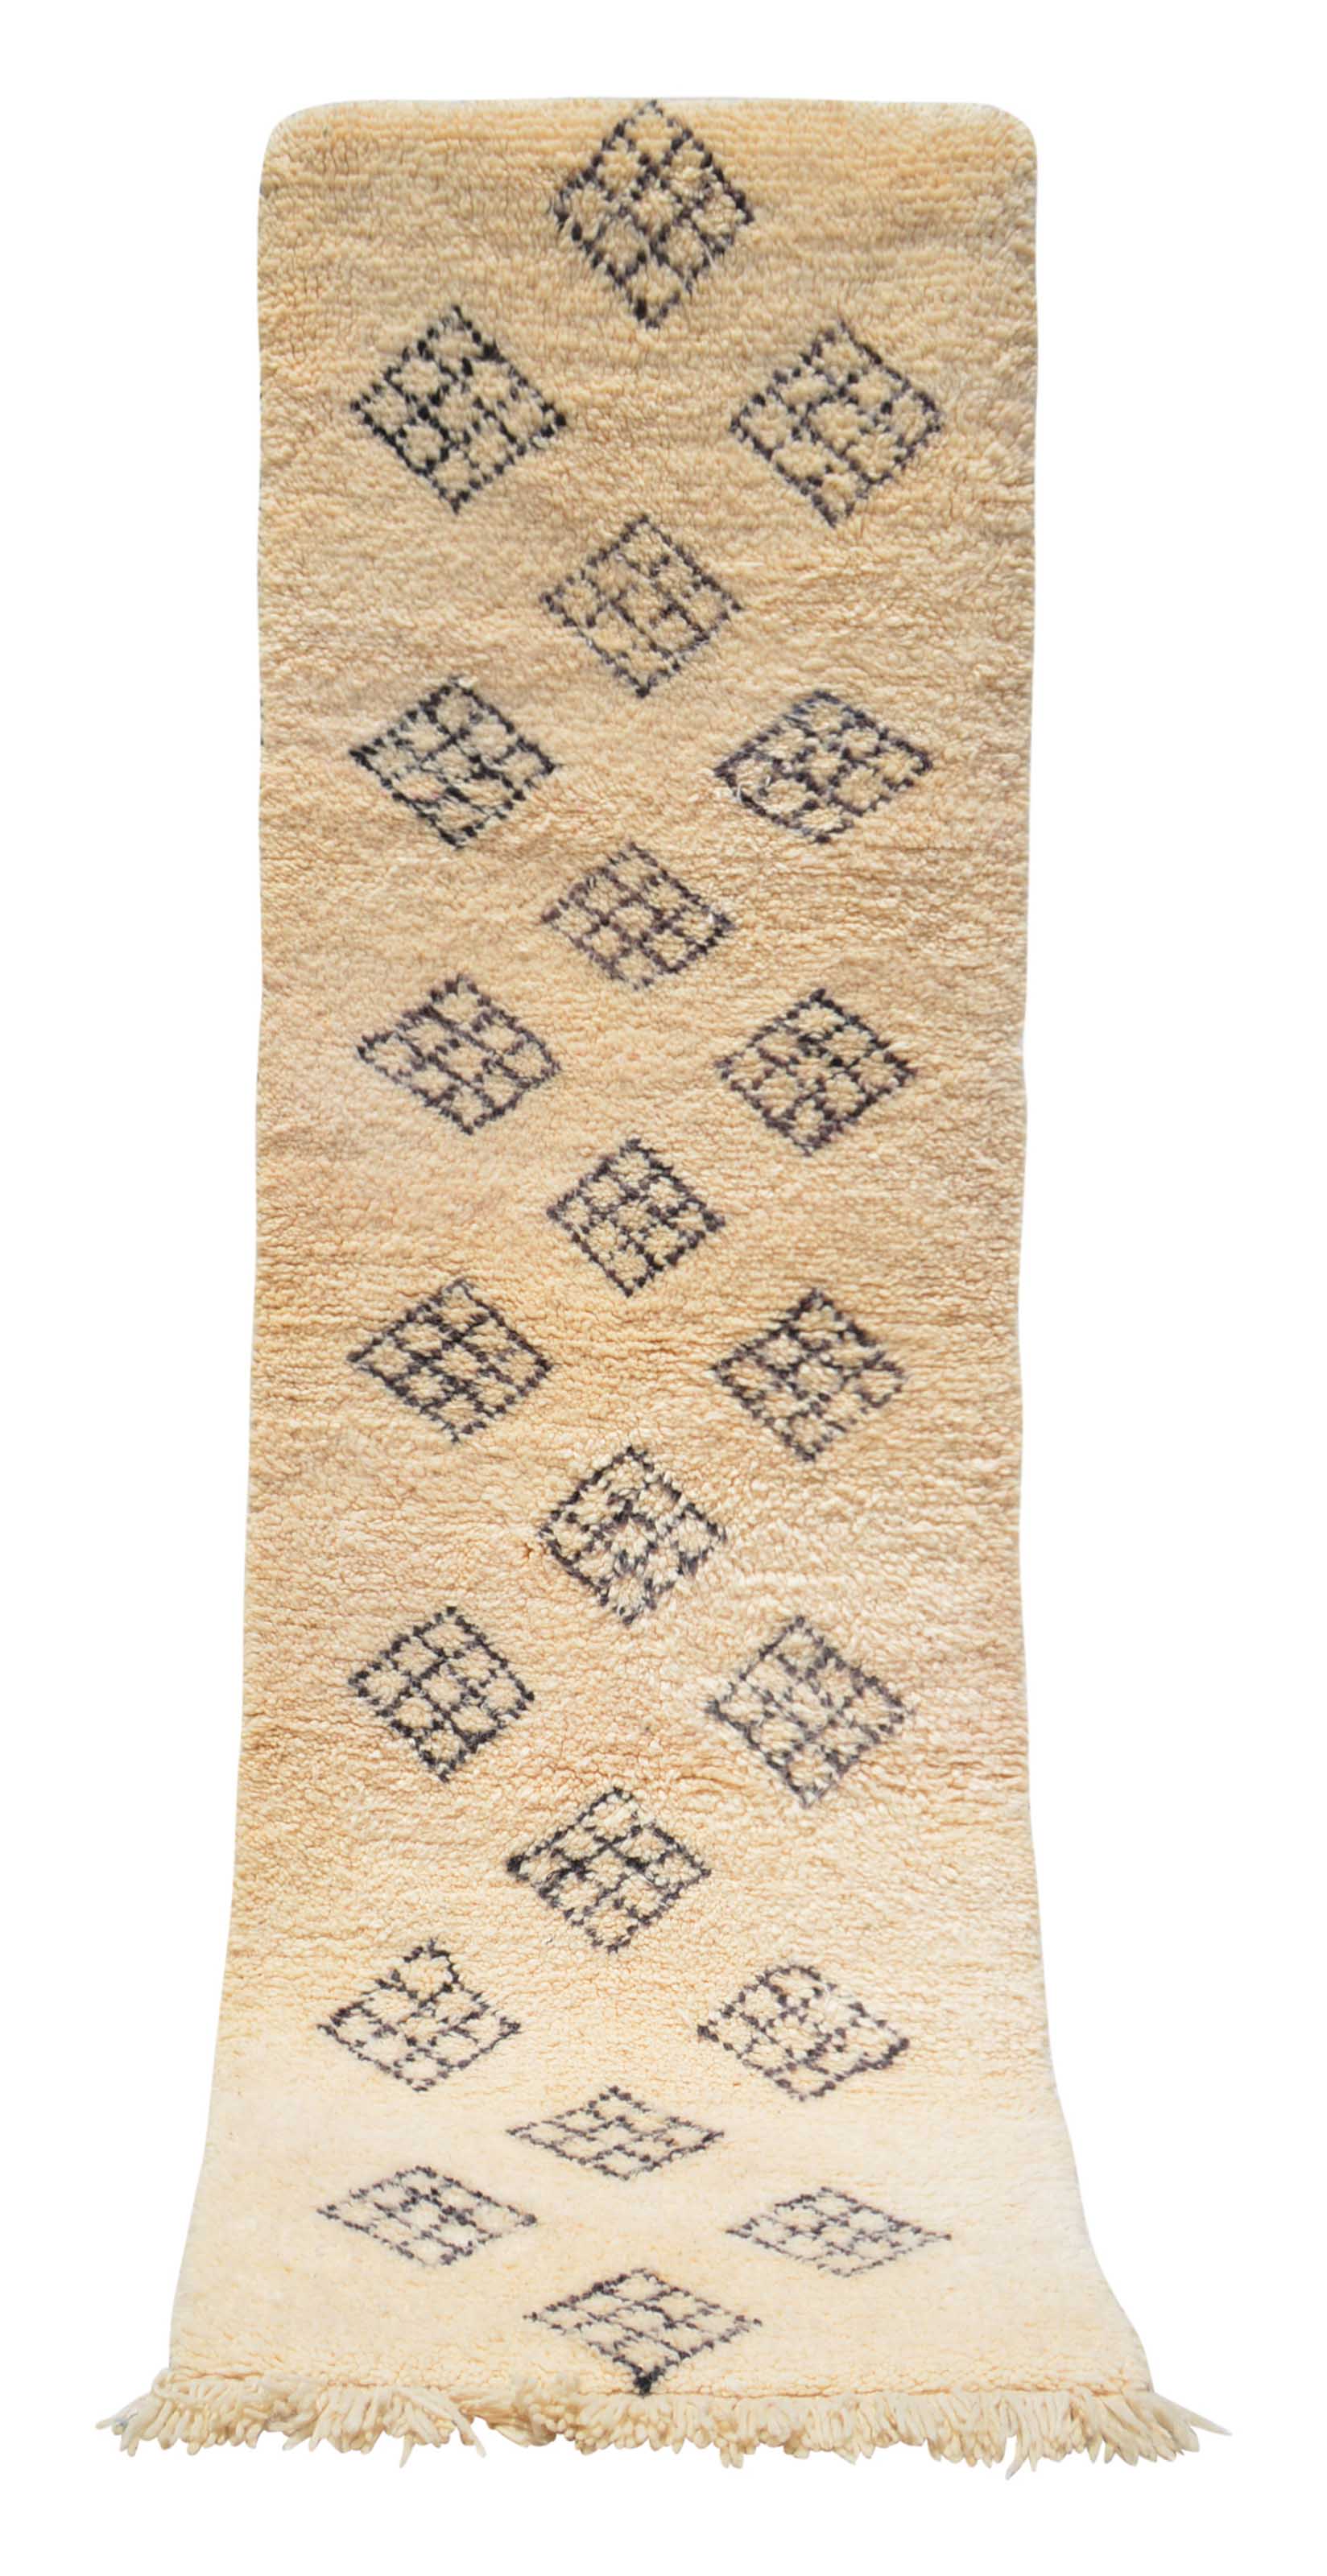 Moroccan Rug Moroccan Trellis Style Rugs | Old Moroccan Rugs Illuminate Collective